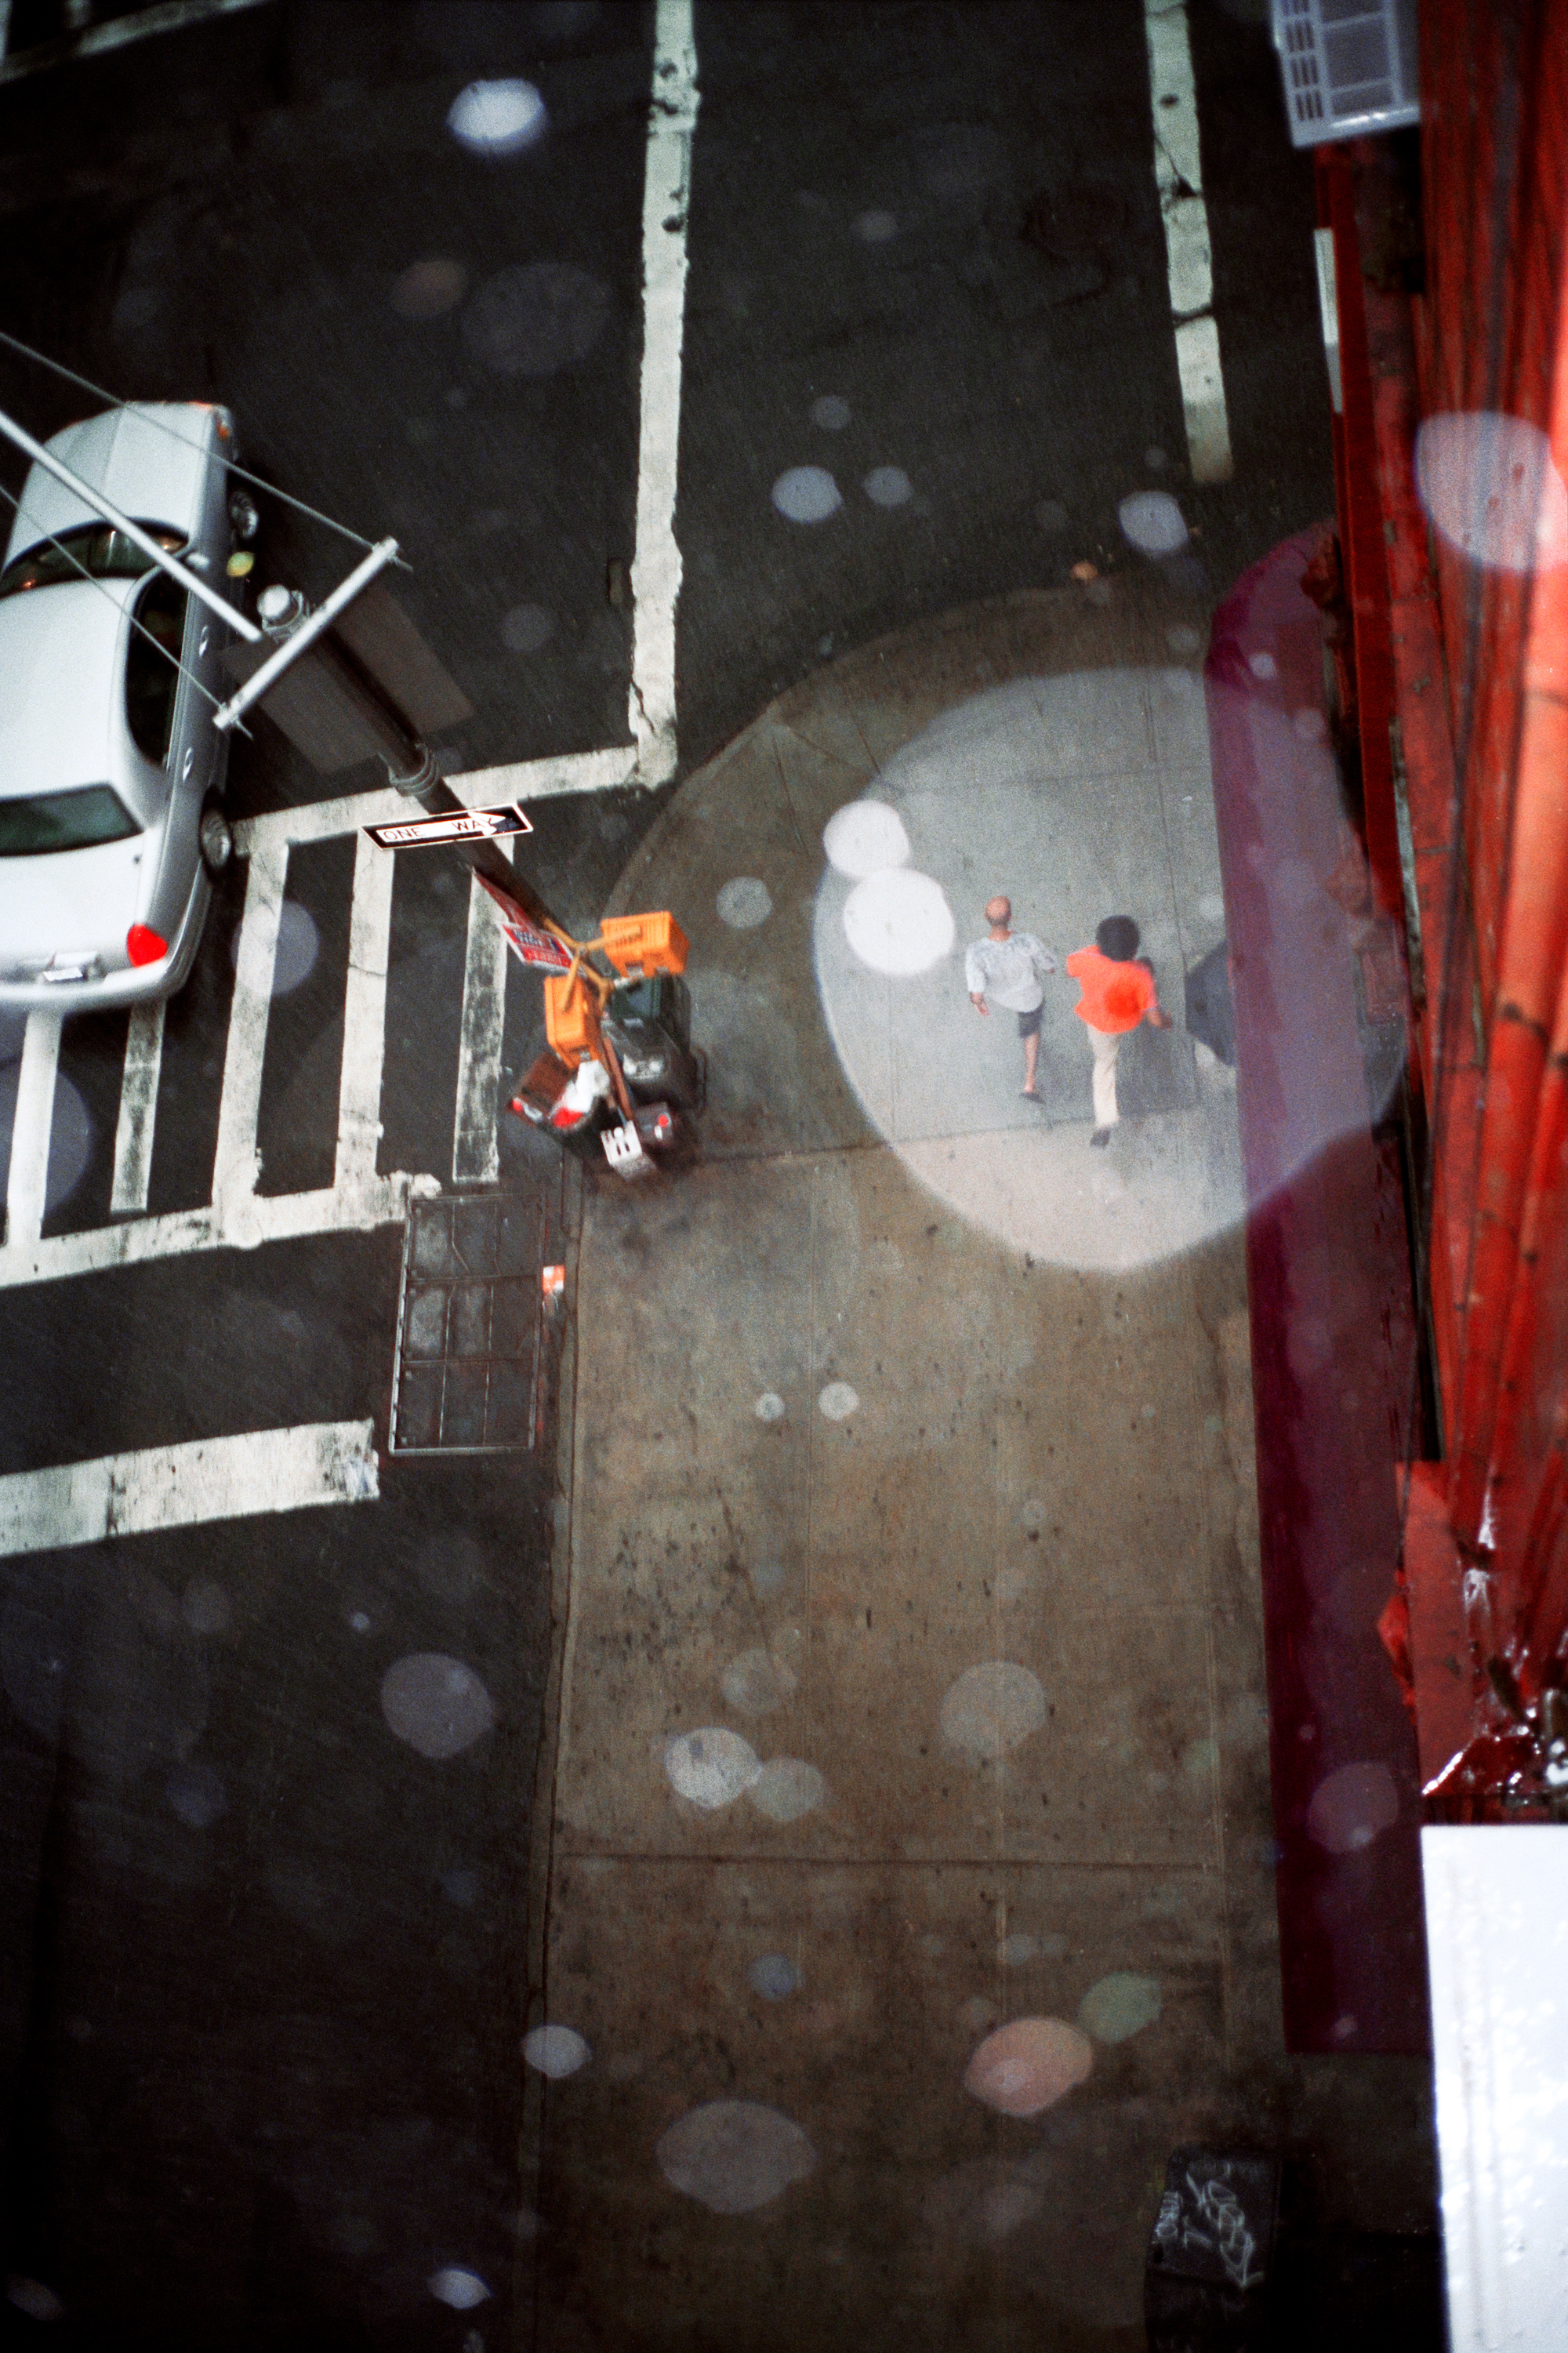 looking down on a new york city street while it's raining by jason dill